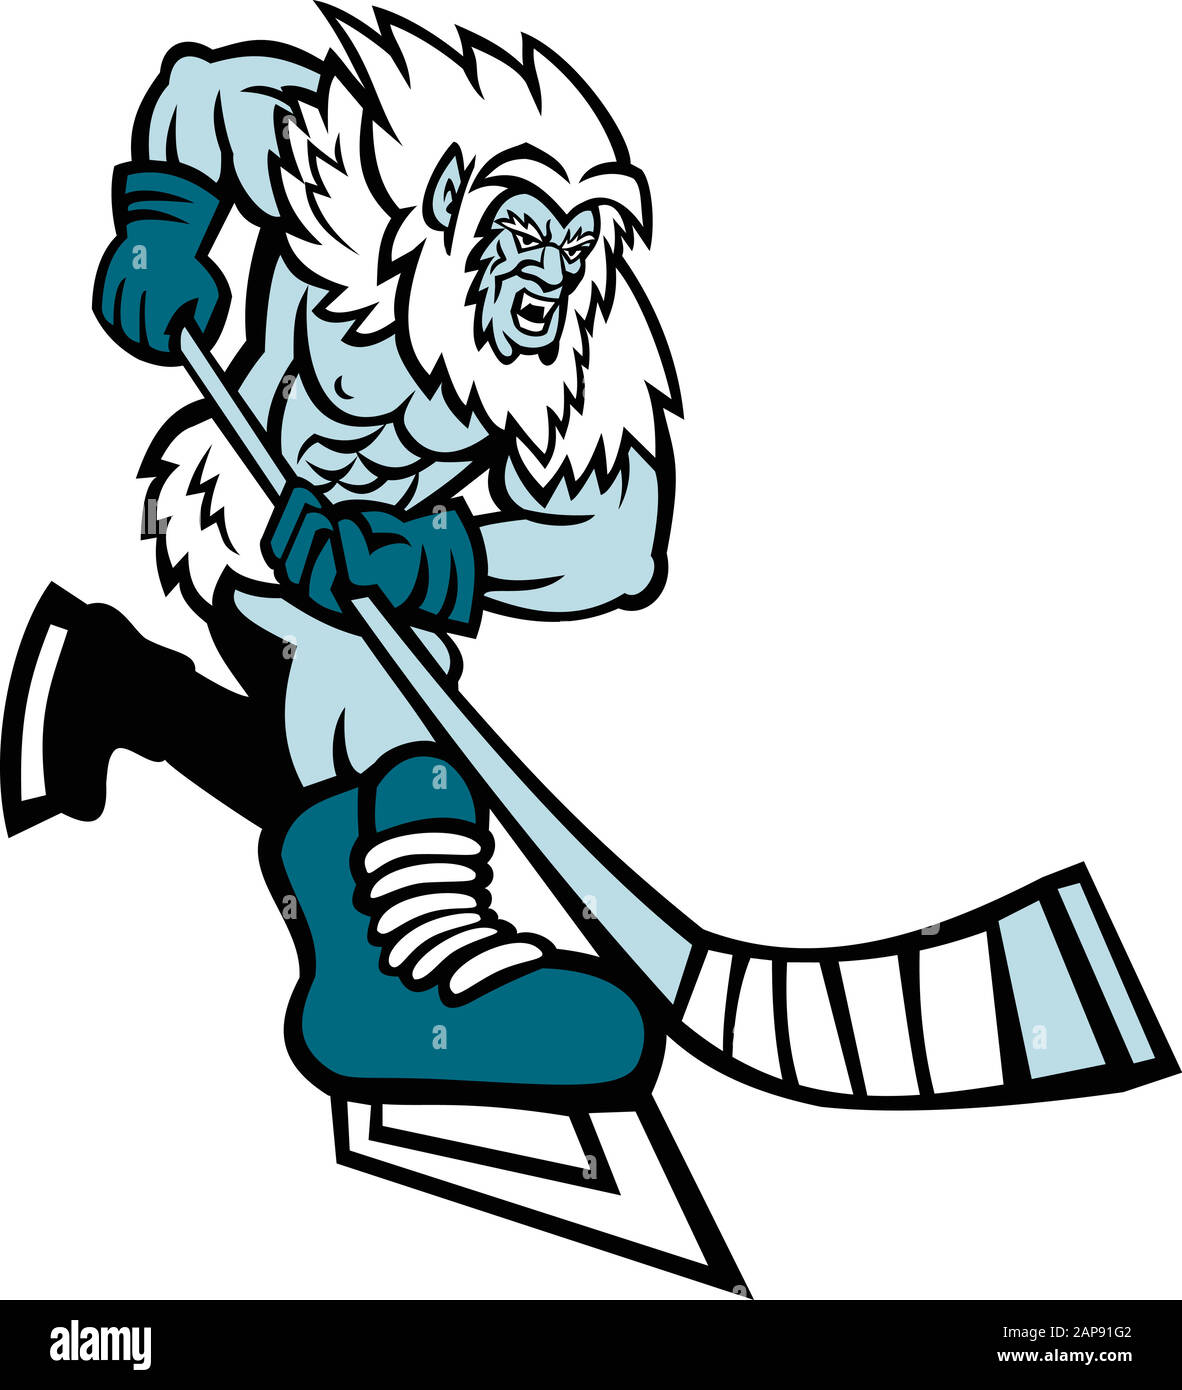 Mascot icon illustration of an aggressive Yeti or Abominable Snowman, a folkloric ape-like creature, with hockey stick playing ice hockey viewed from Stock Vector